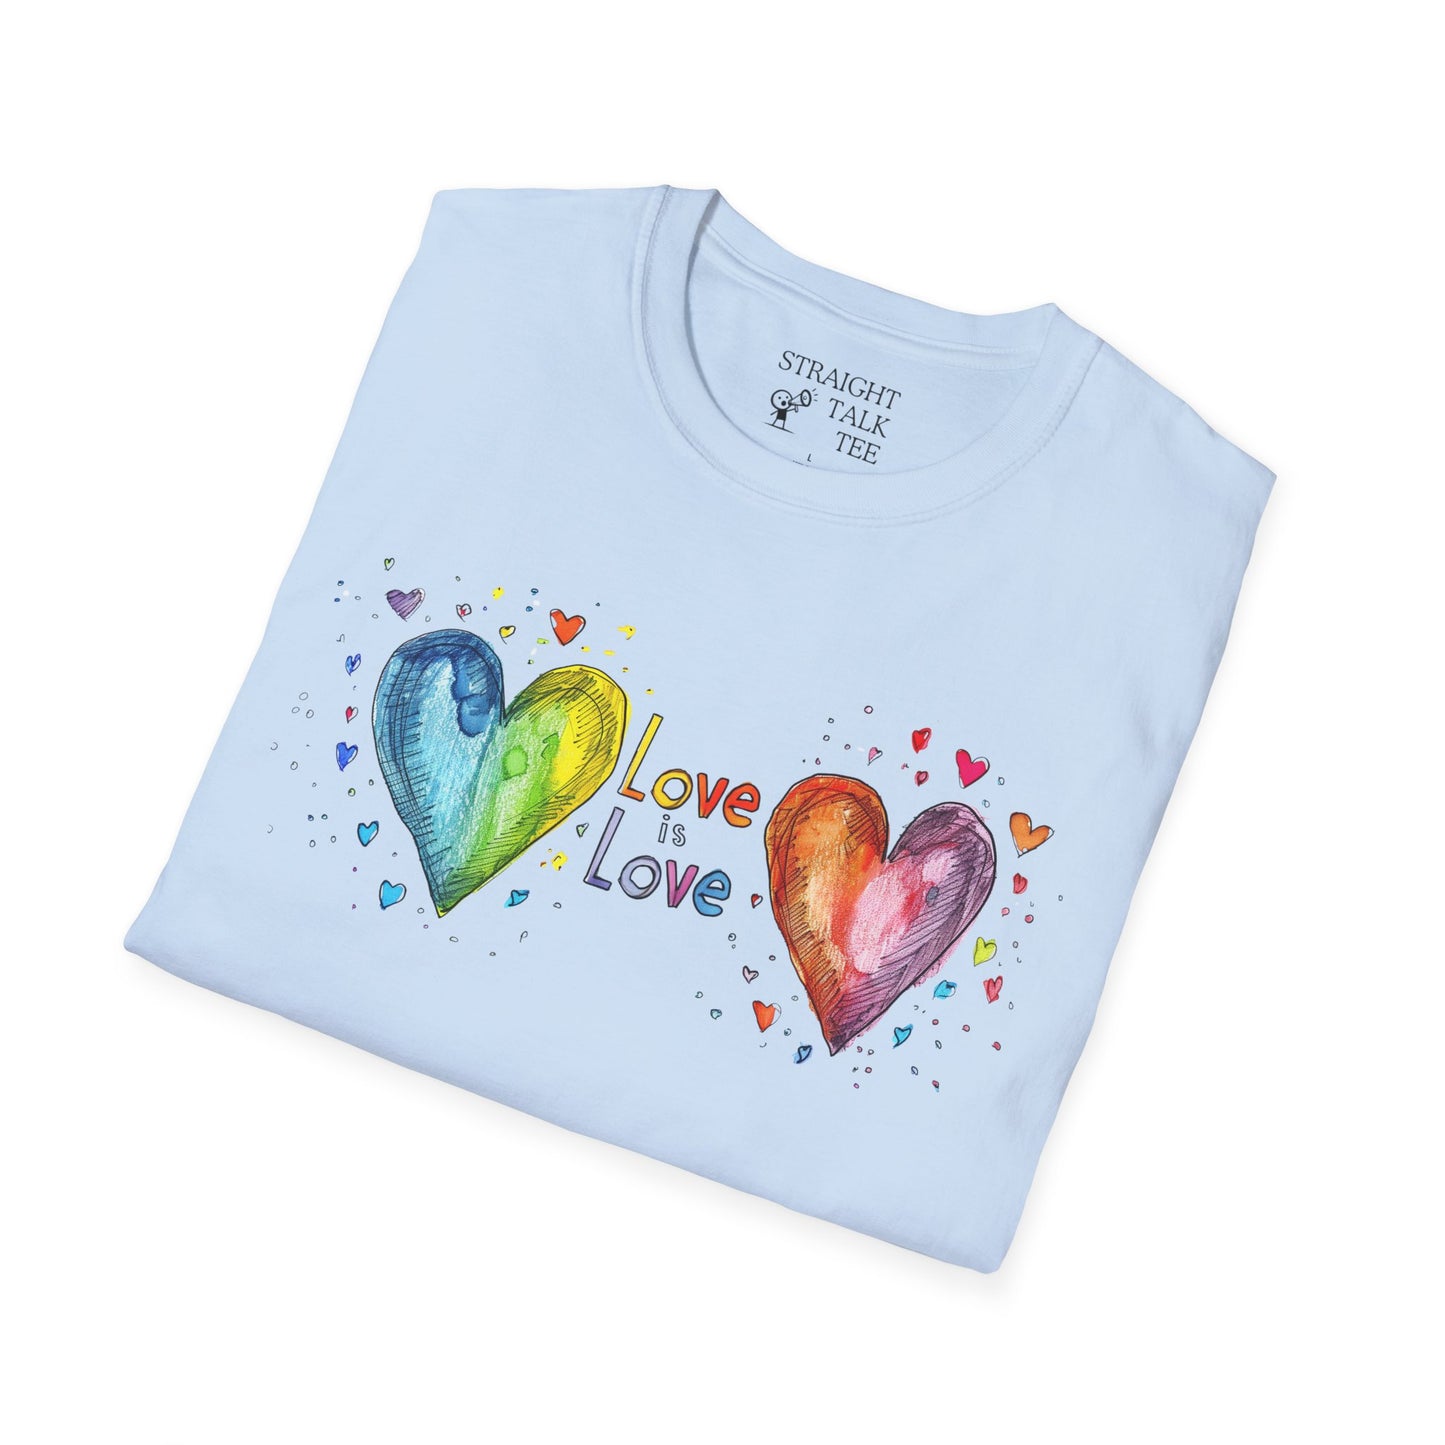 Love is Love Two Hearts T-Shirt | Show Your Pride Shirt!